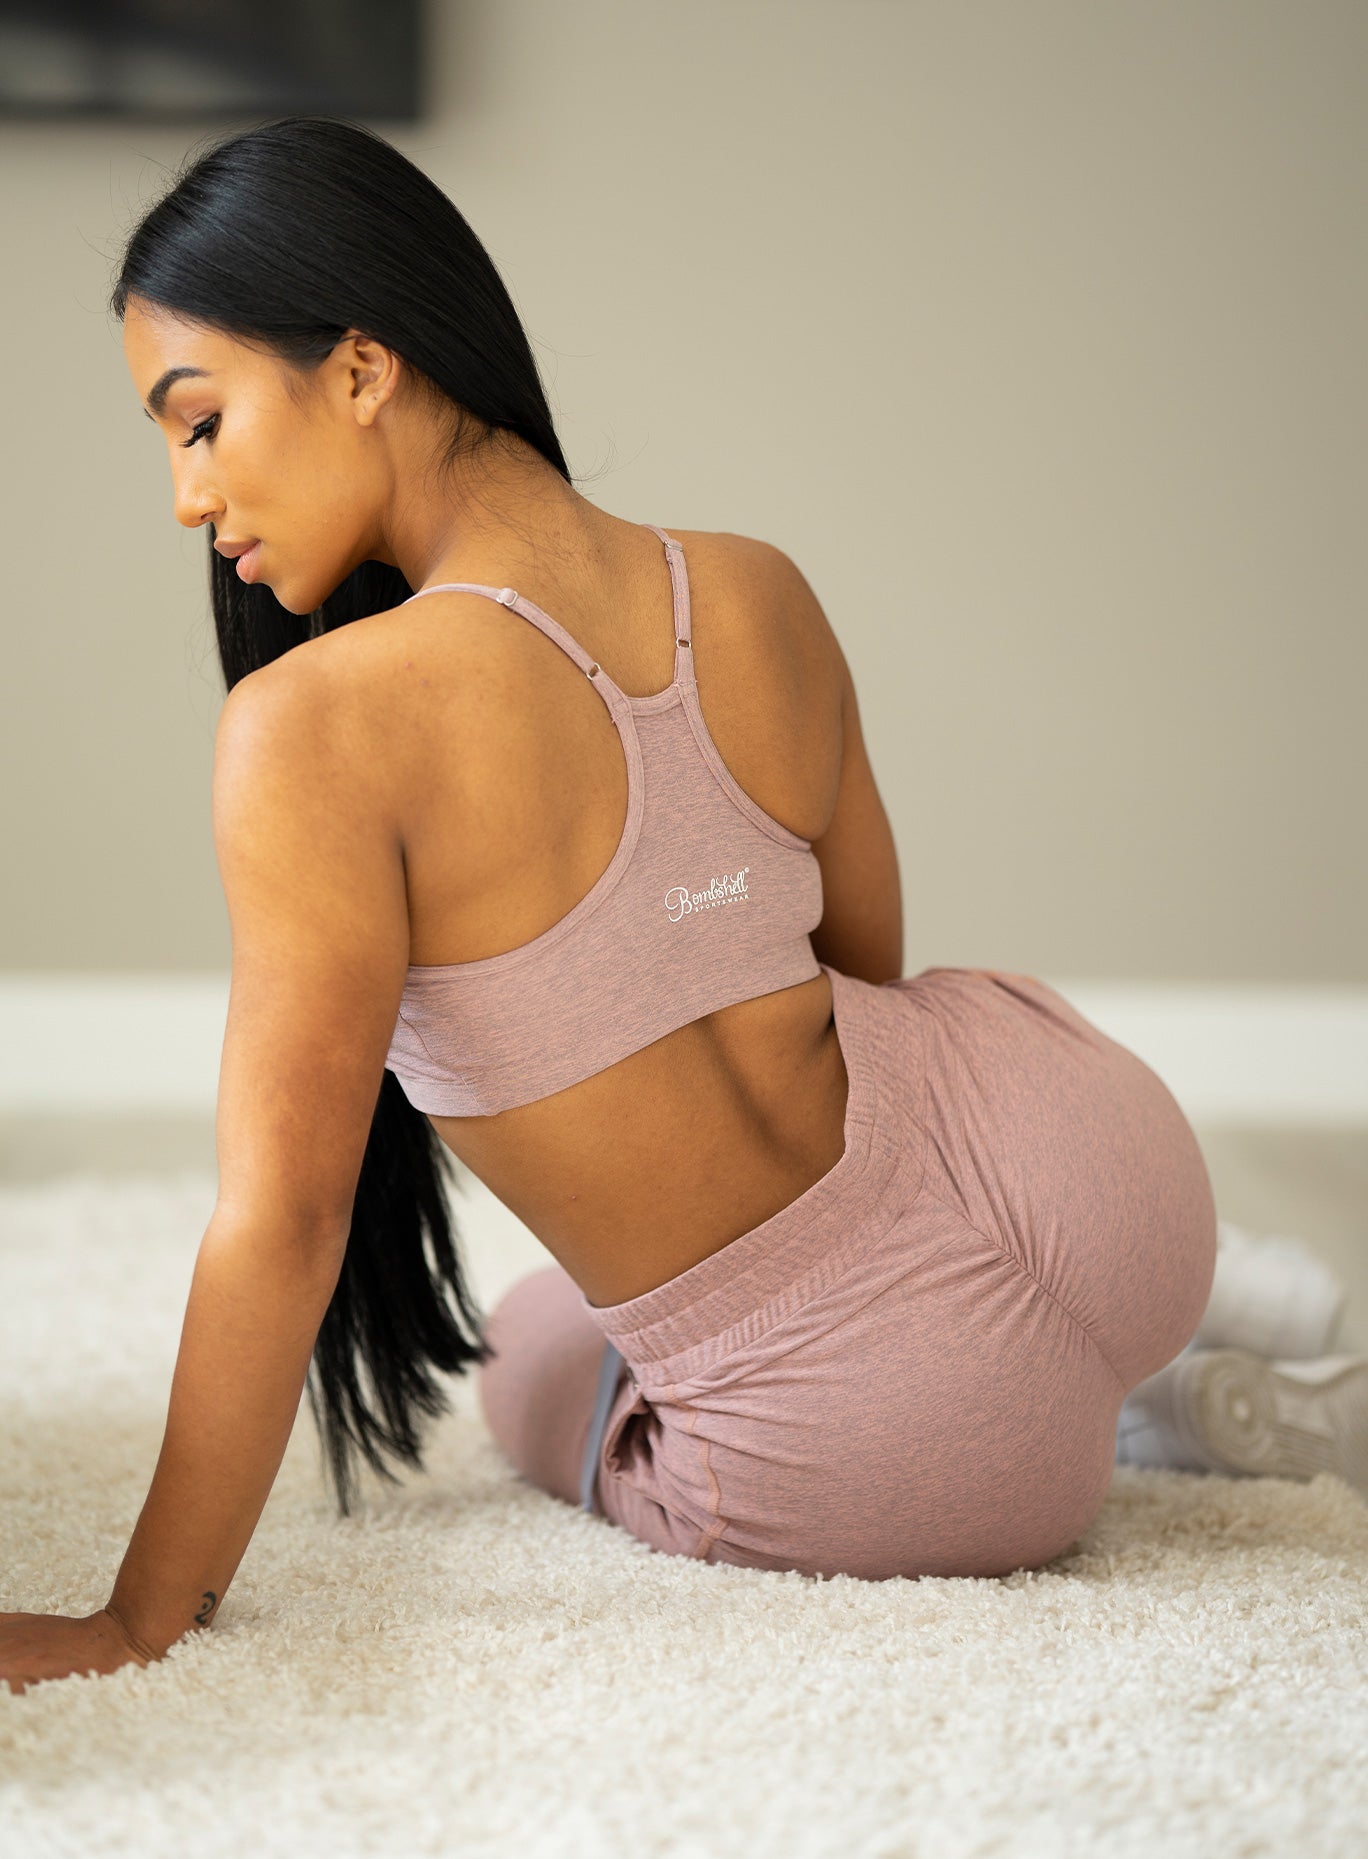 Back view of the model sitting down wearing our relax sports bra in sand dune color and a matching joggers